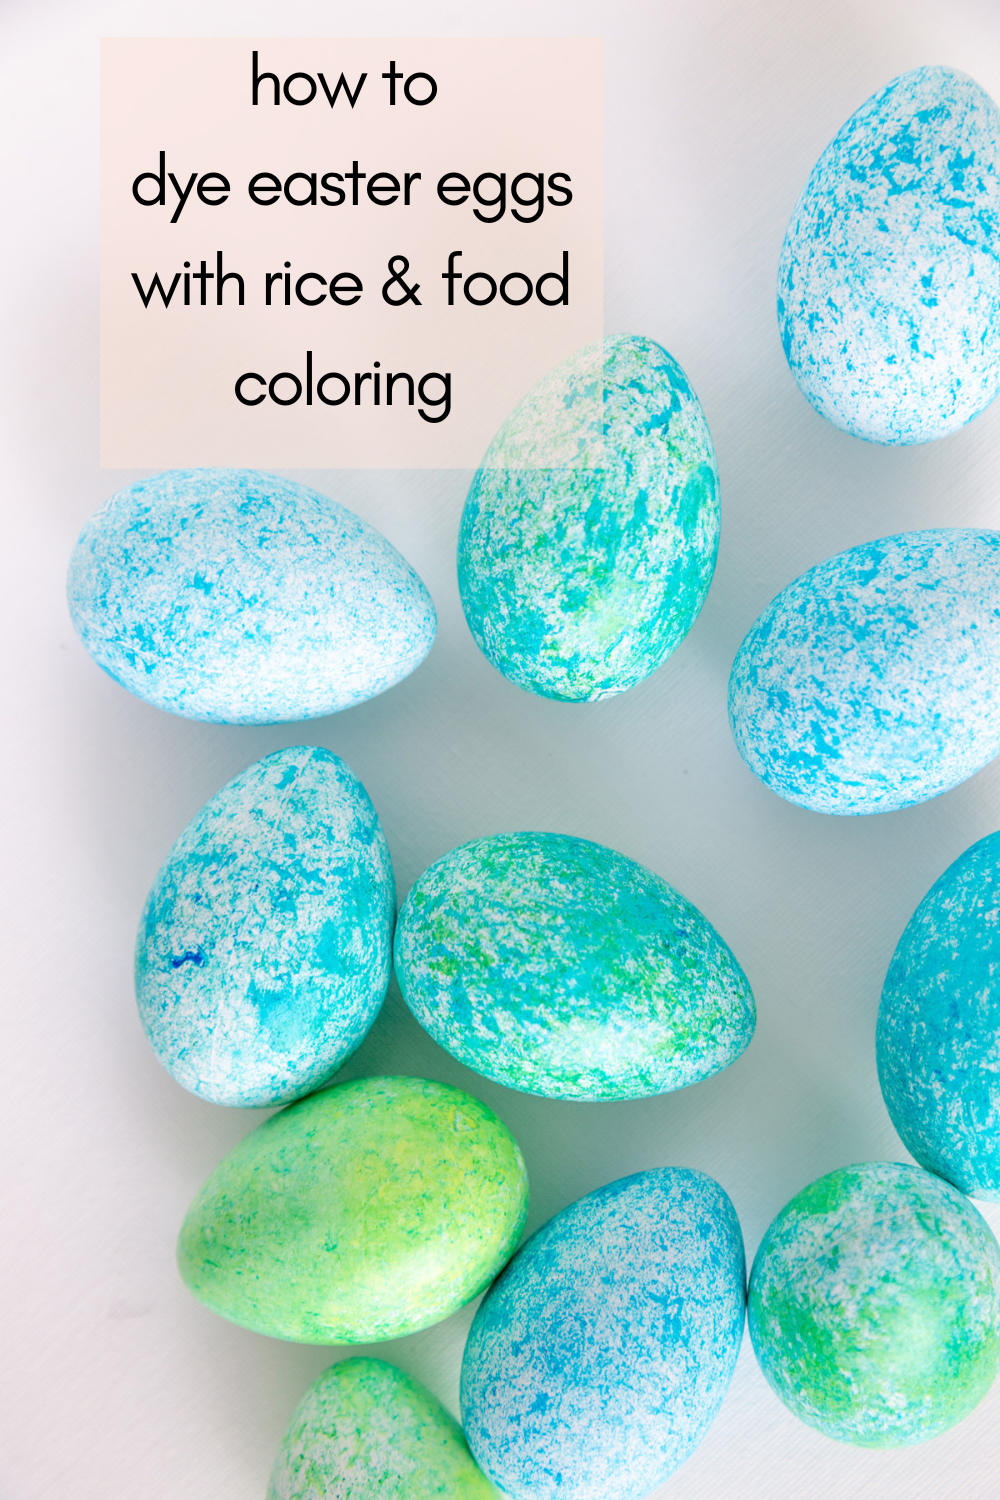 DIY speckled easter eggs using rice and food coloring